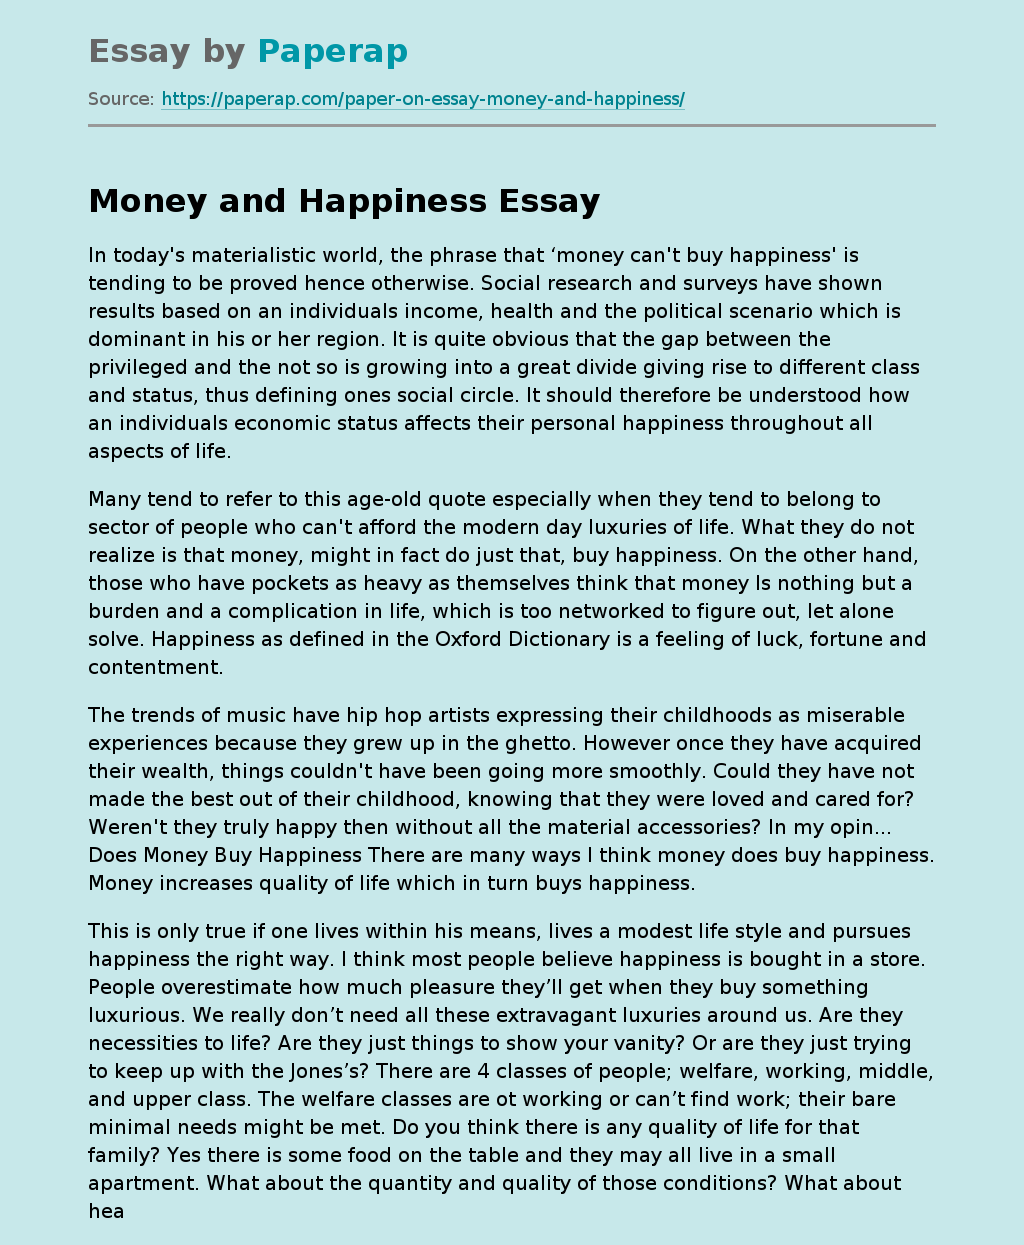 can money buy happiness essay 200 words